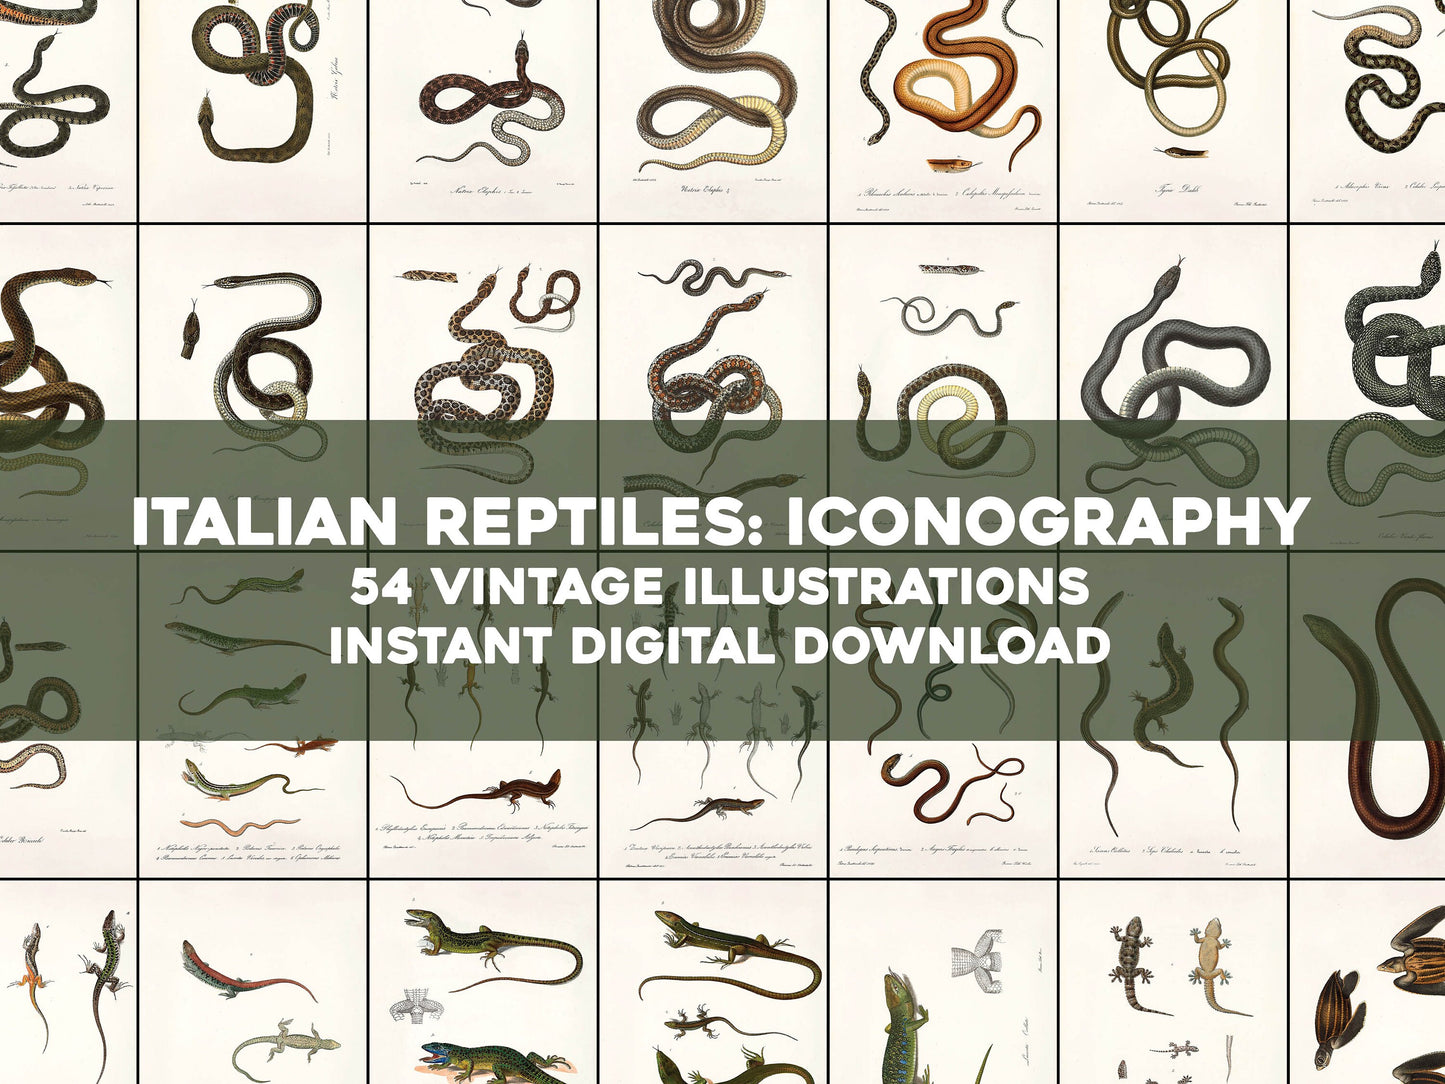 Iconography of Italian Fauna Reptiles [54 Images]